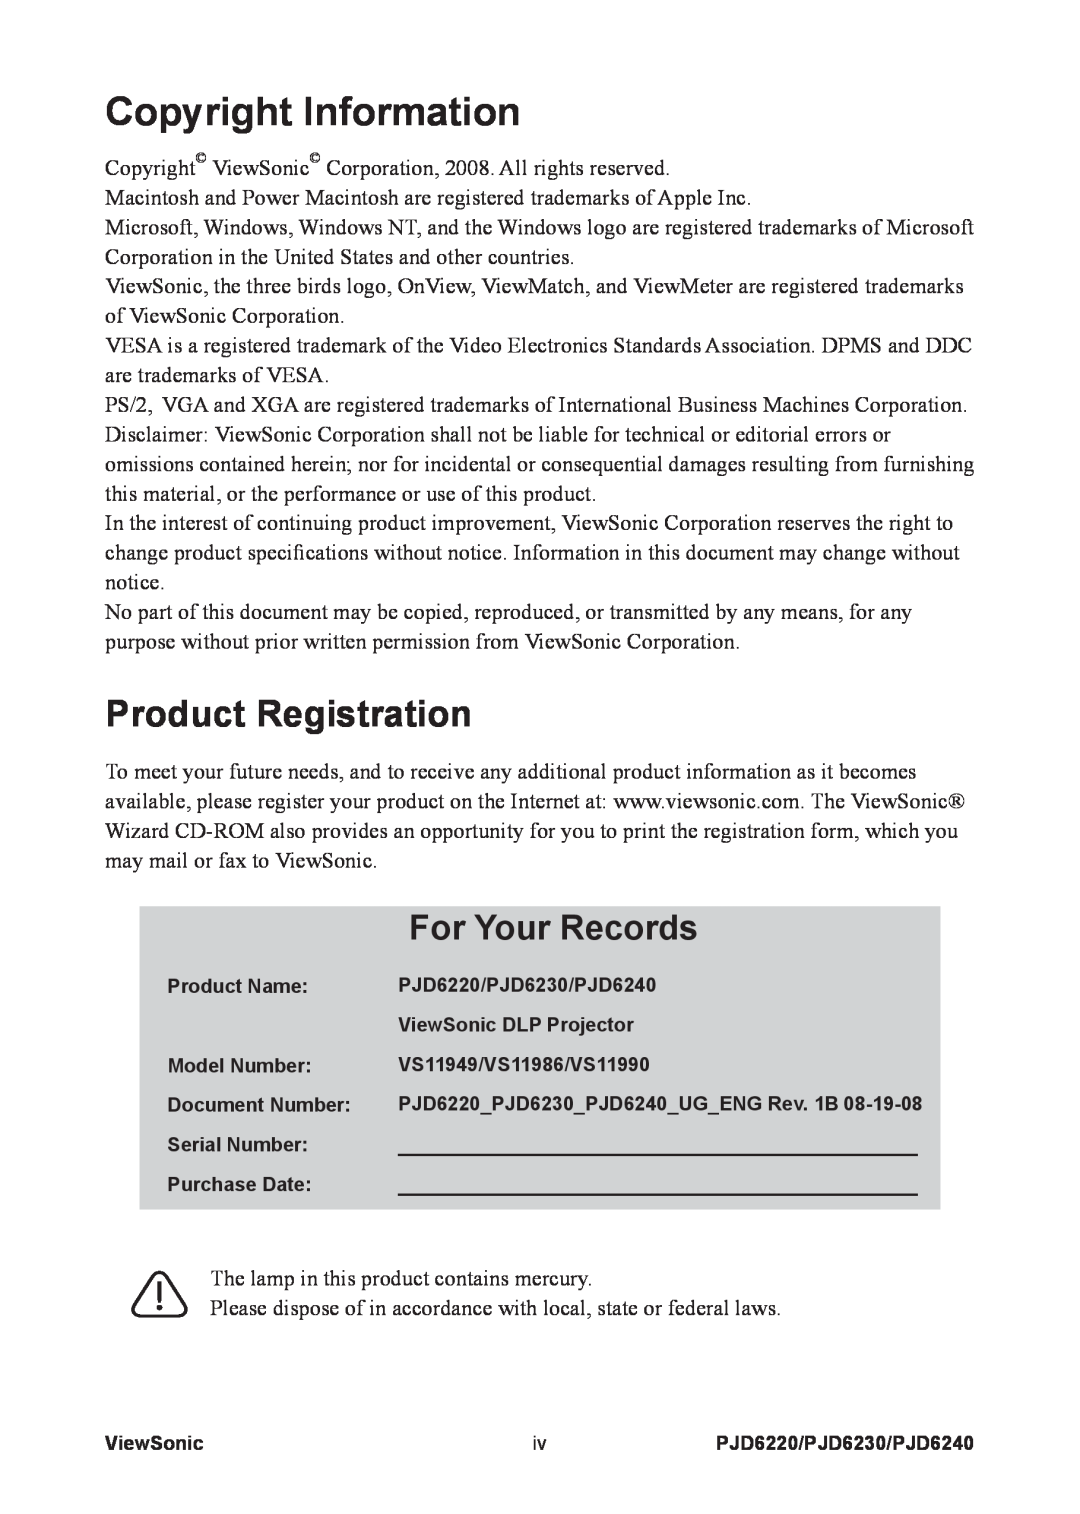 ViewSonic PJD6220, PJD6240, PJD6230 warranty Product Registration, Copyright Information, For Your Records 